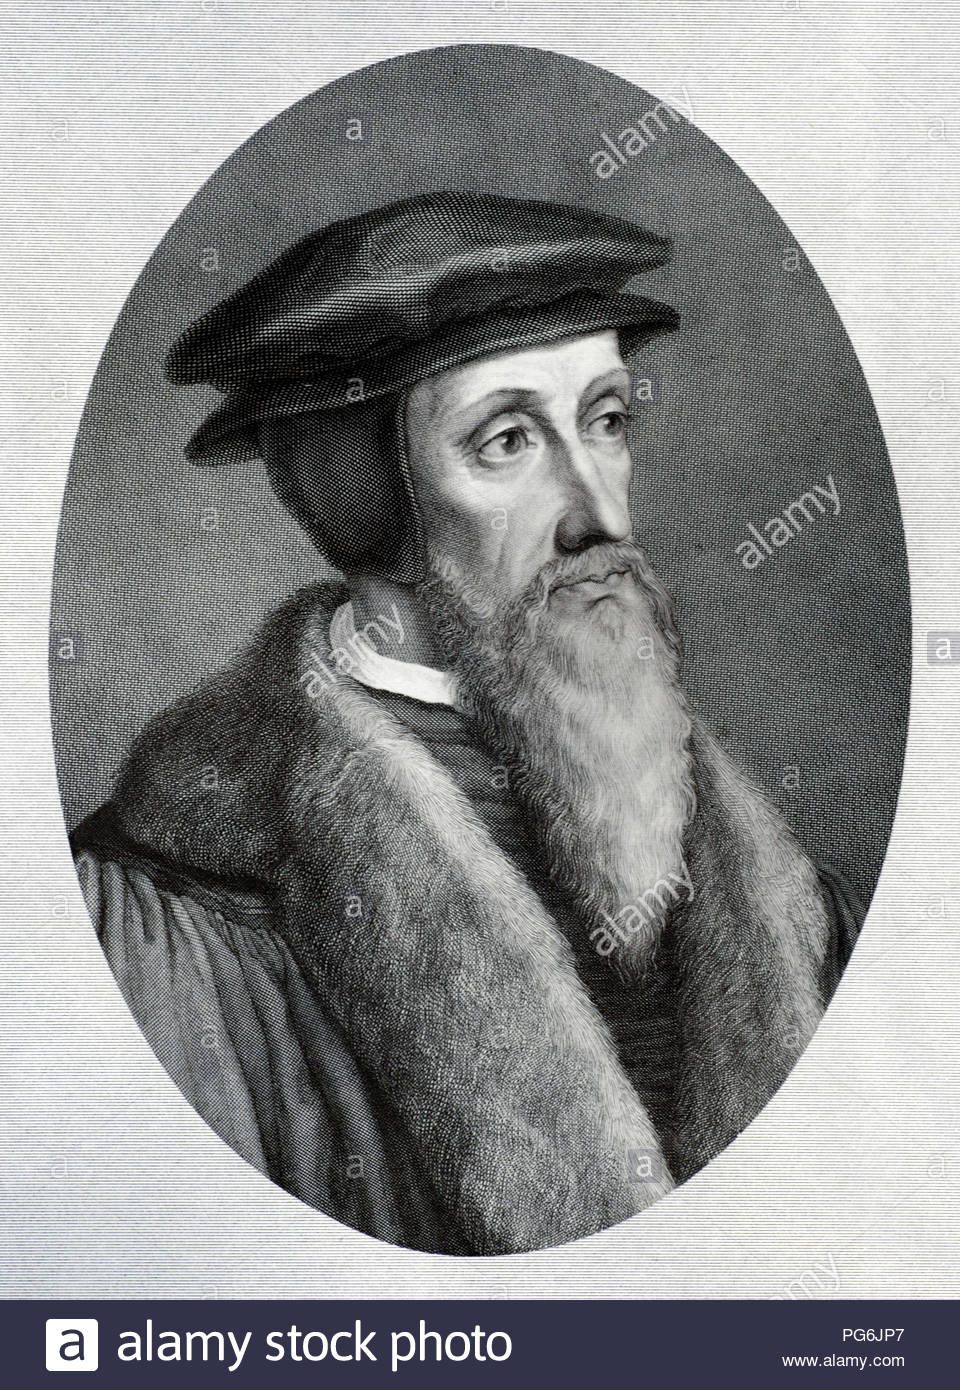 John Calvin portrait, 1509 – 1564 was a French theologian, pastor and reformer in Geneva during the Protestant Reformation, vintage illustration from 1880 Stock Photo